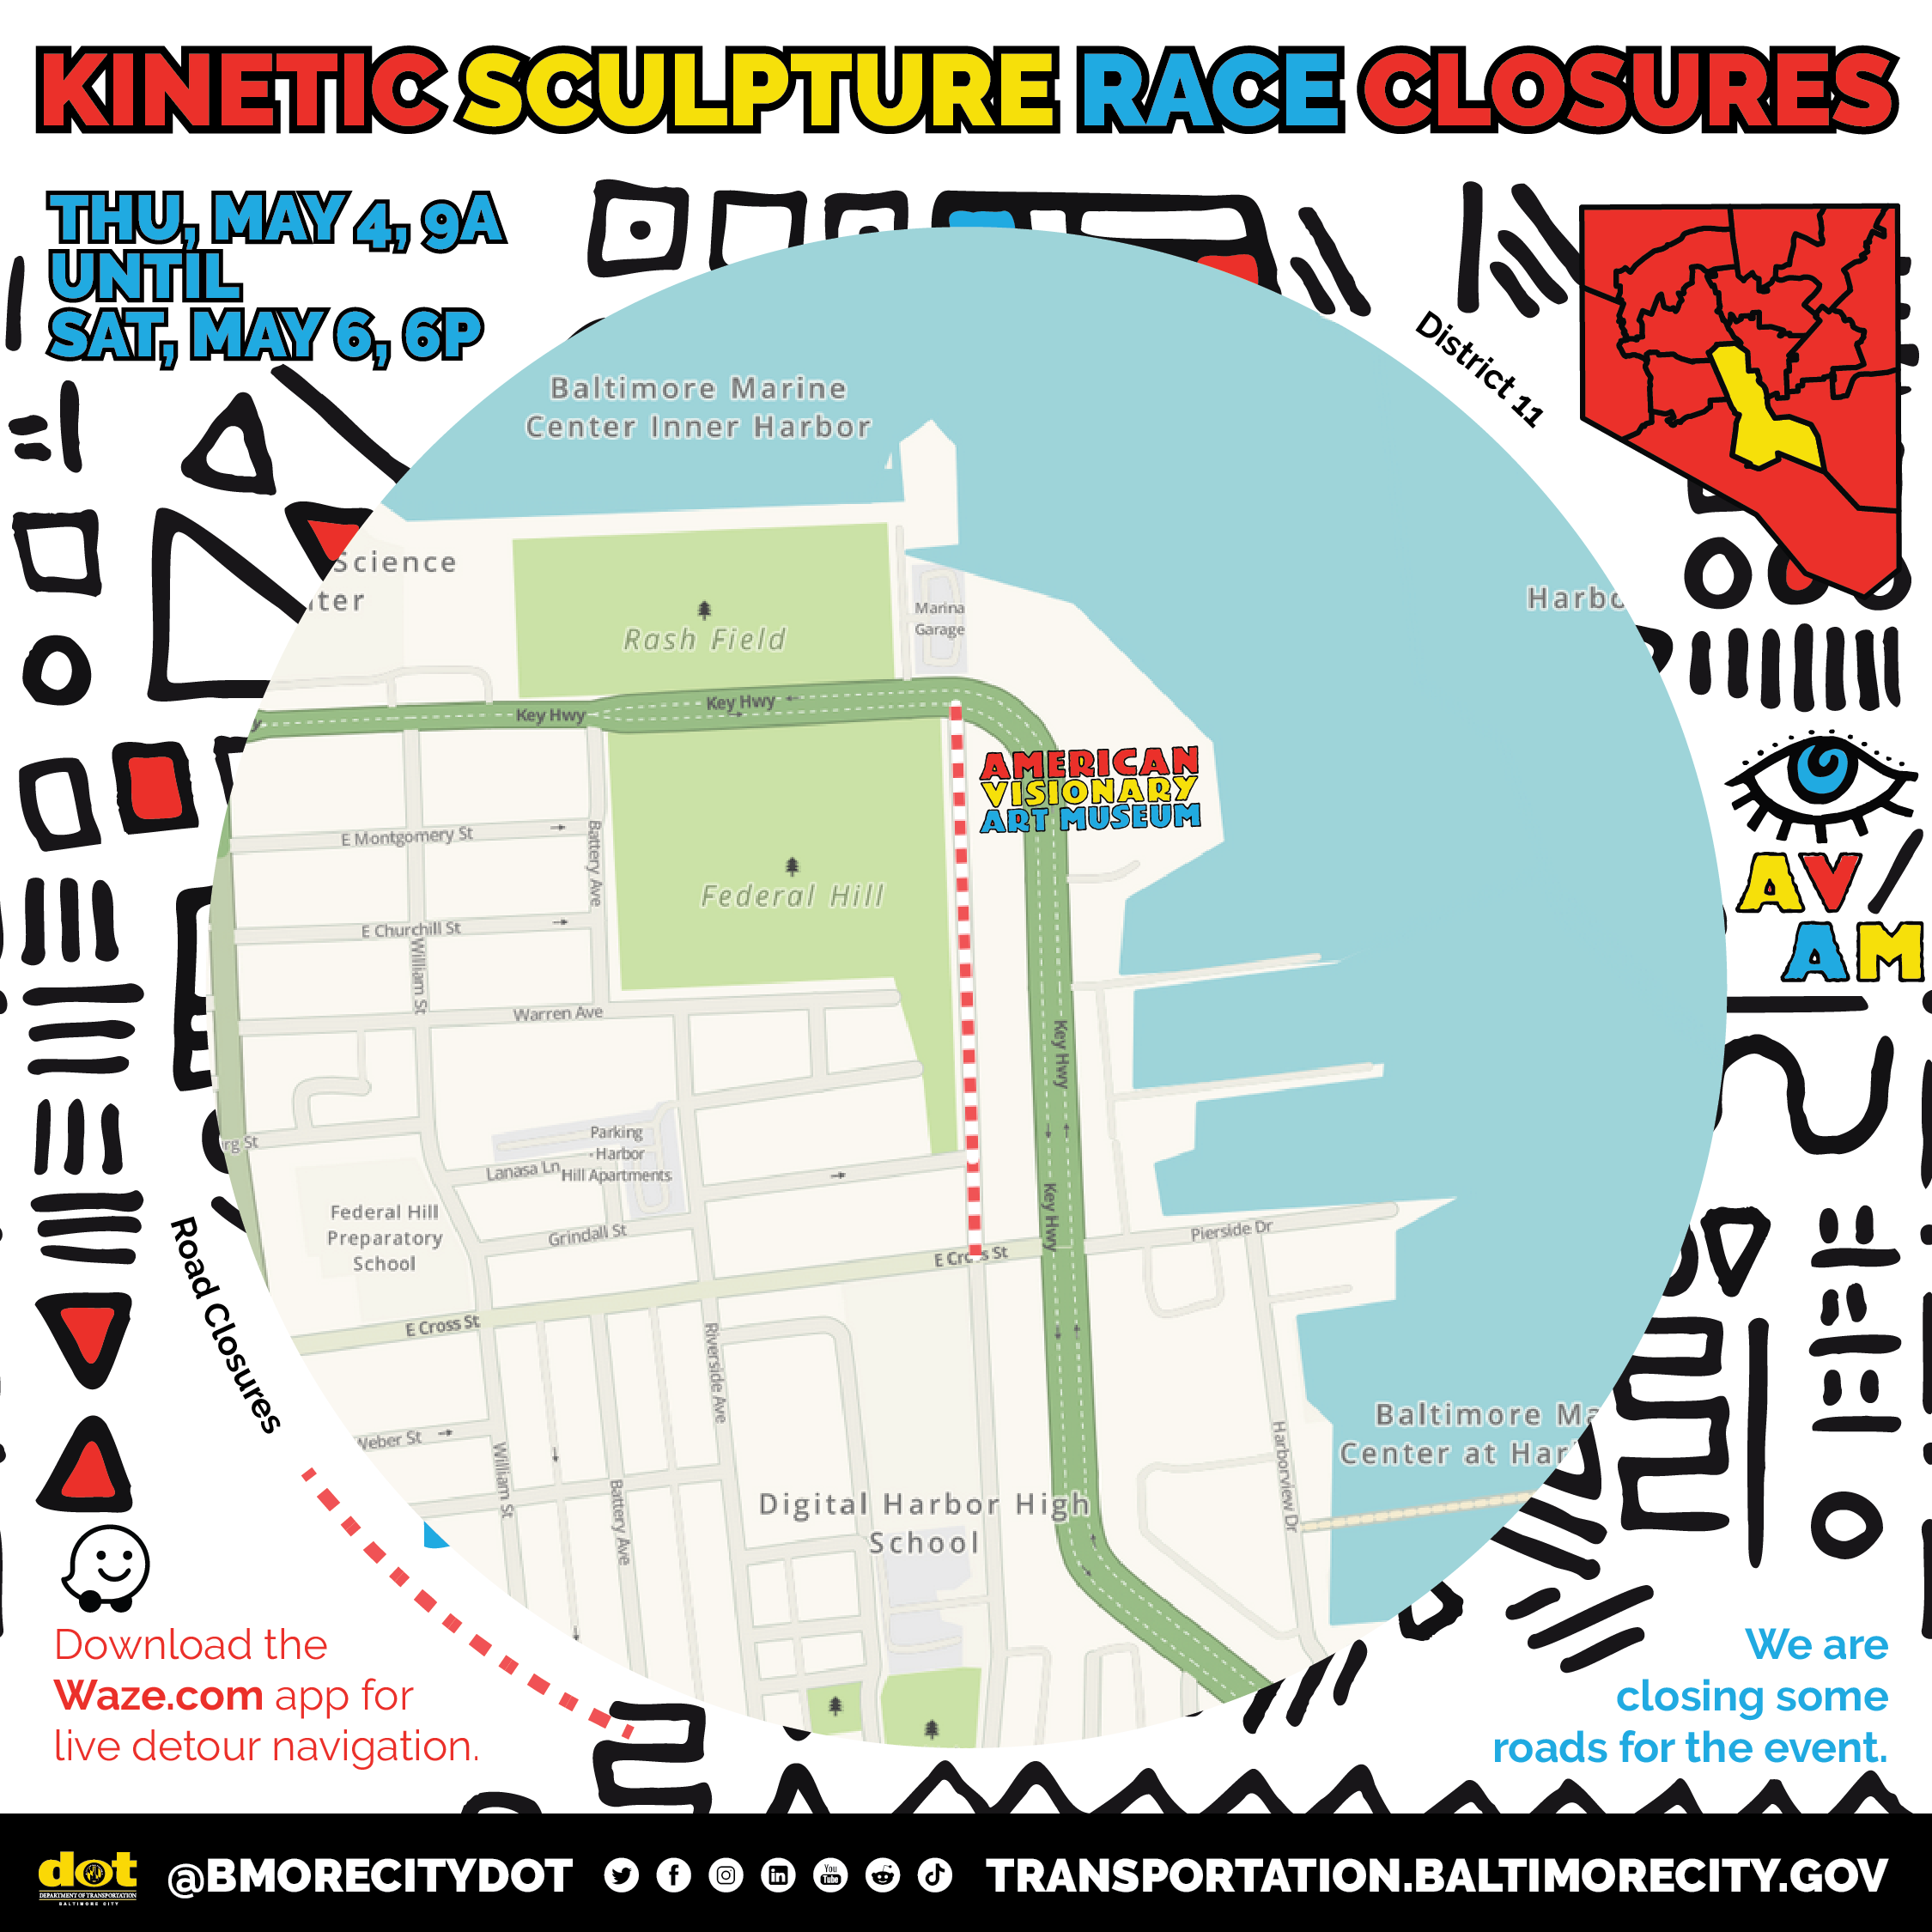 Traffic Modifications for the Sculpture Race Baltimore City